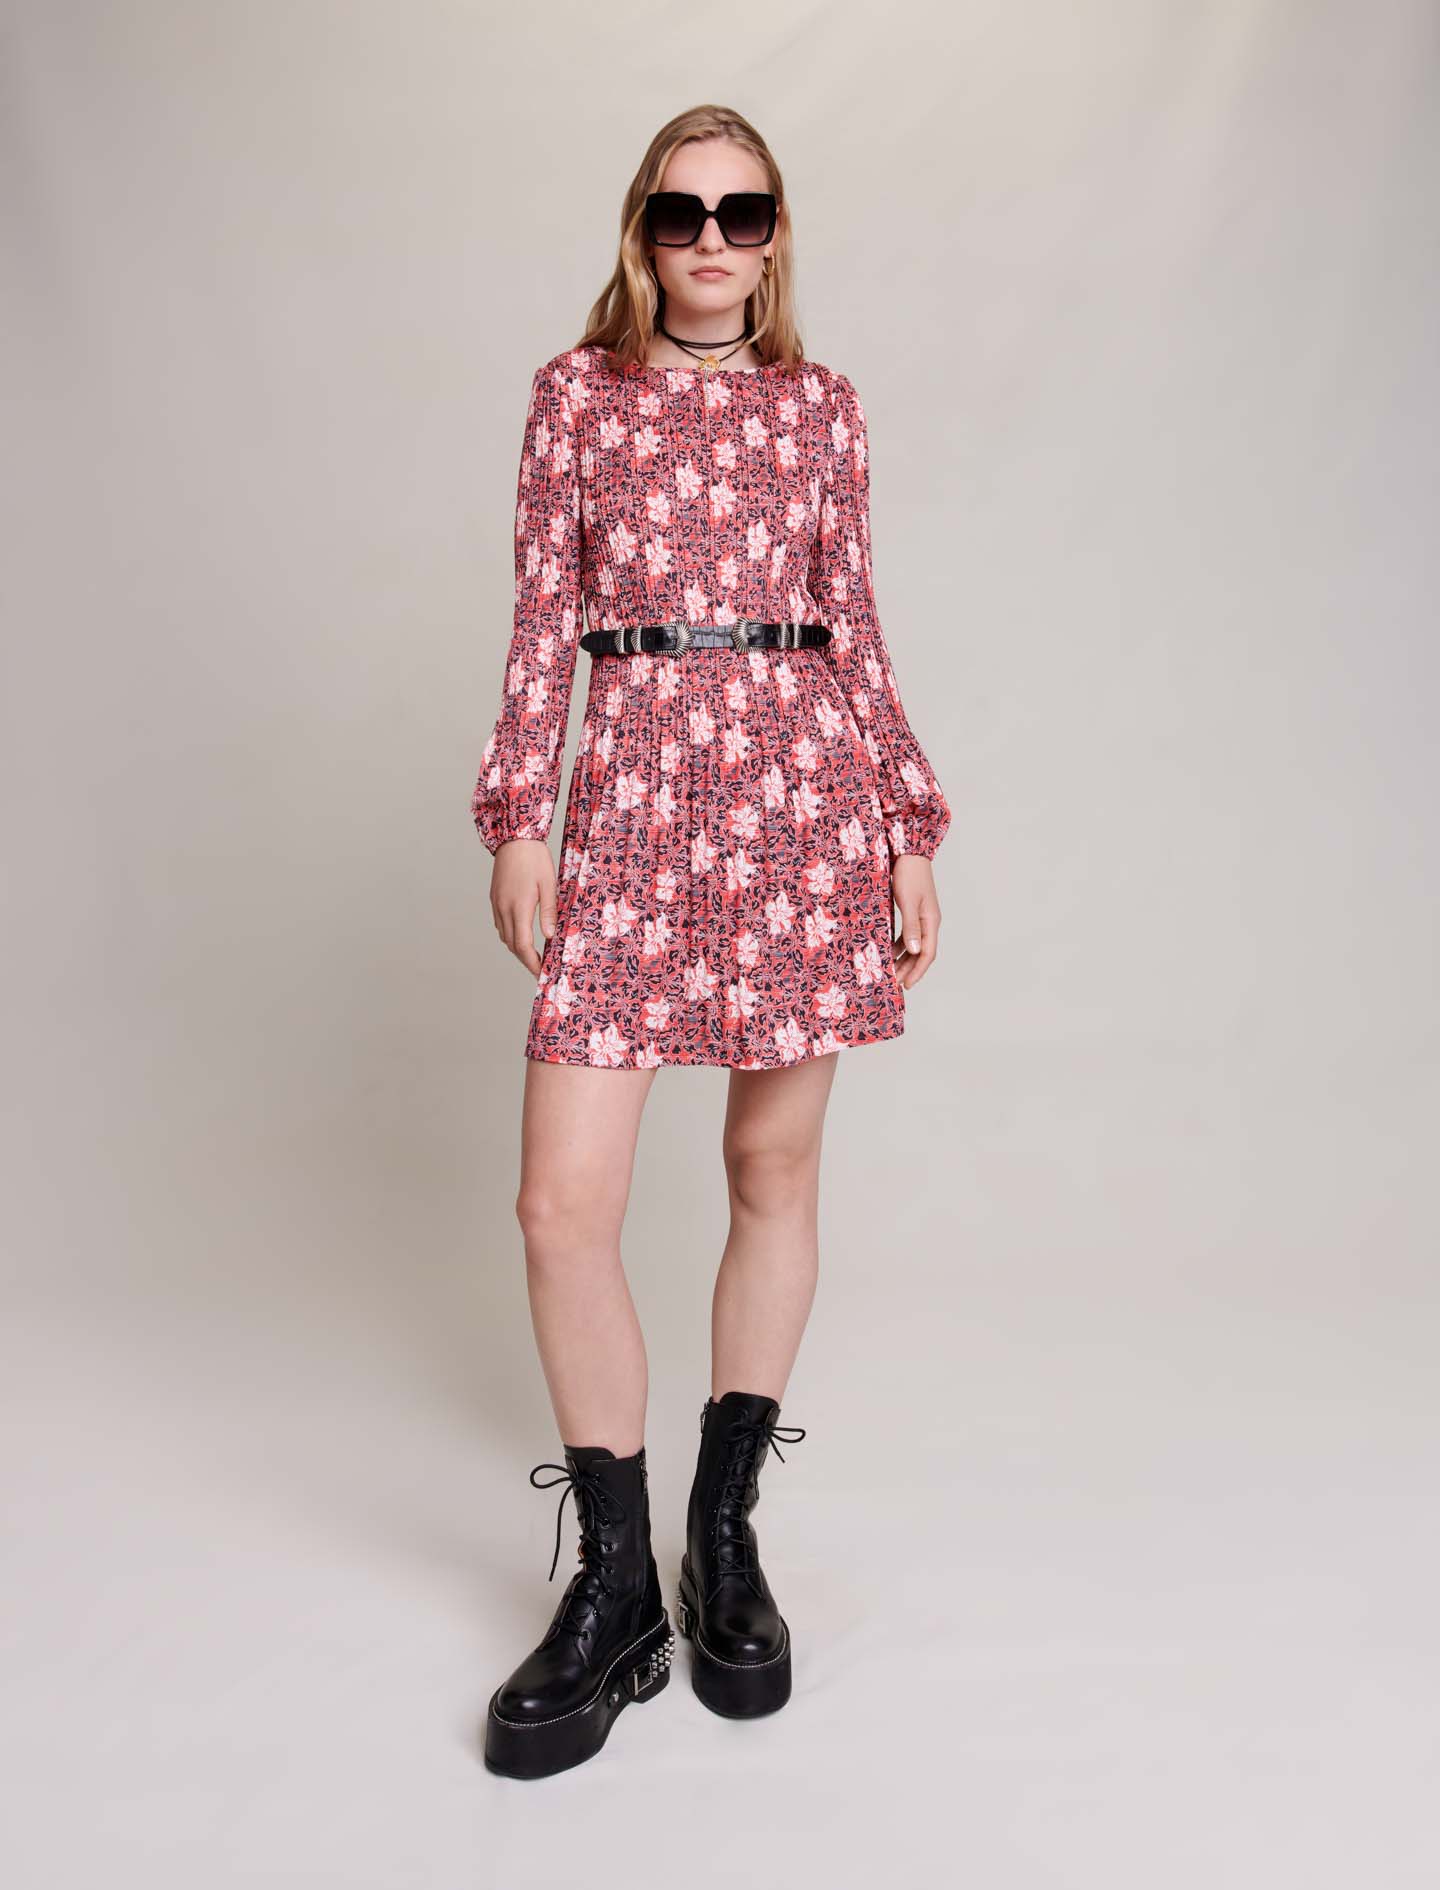 Maje Woman's polyester Short floral dress for Fall/Winter, in color Red flowers lurex print /